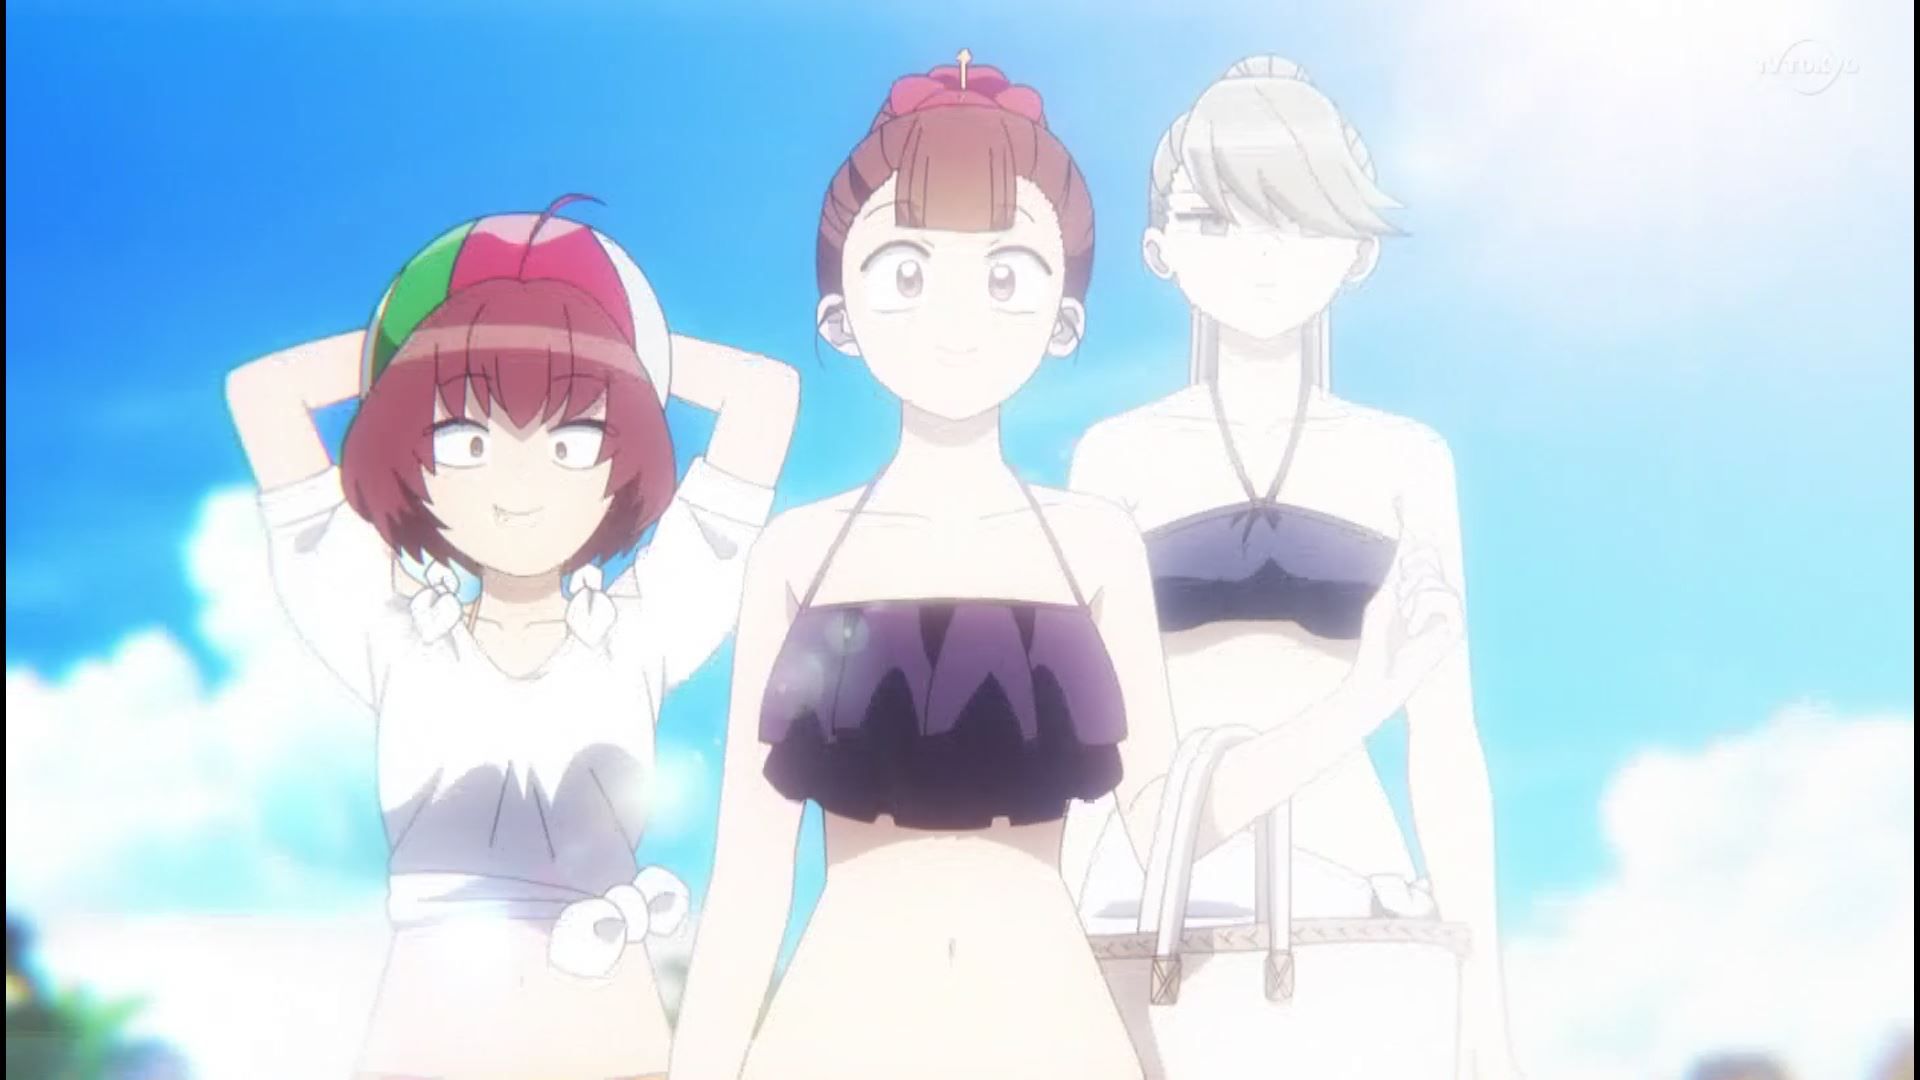 In episode 7 of the anime "Komi-san is a communicator," the swimsuits of girls with erotic! 7